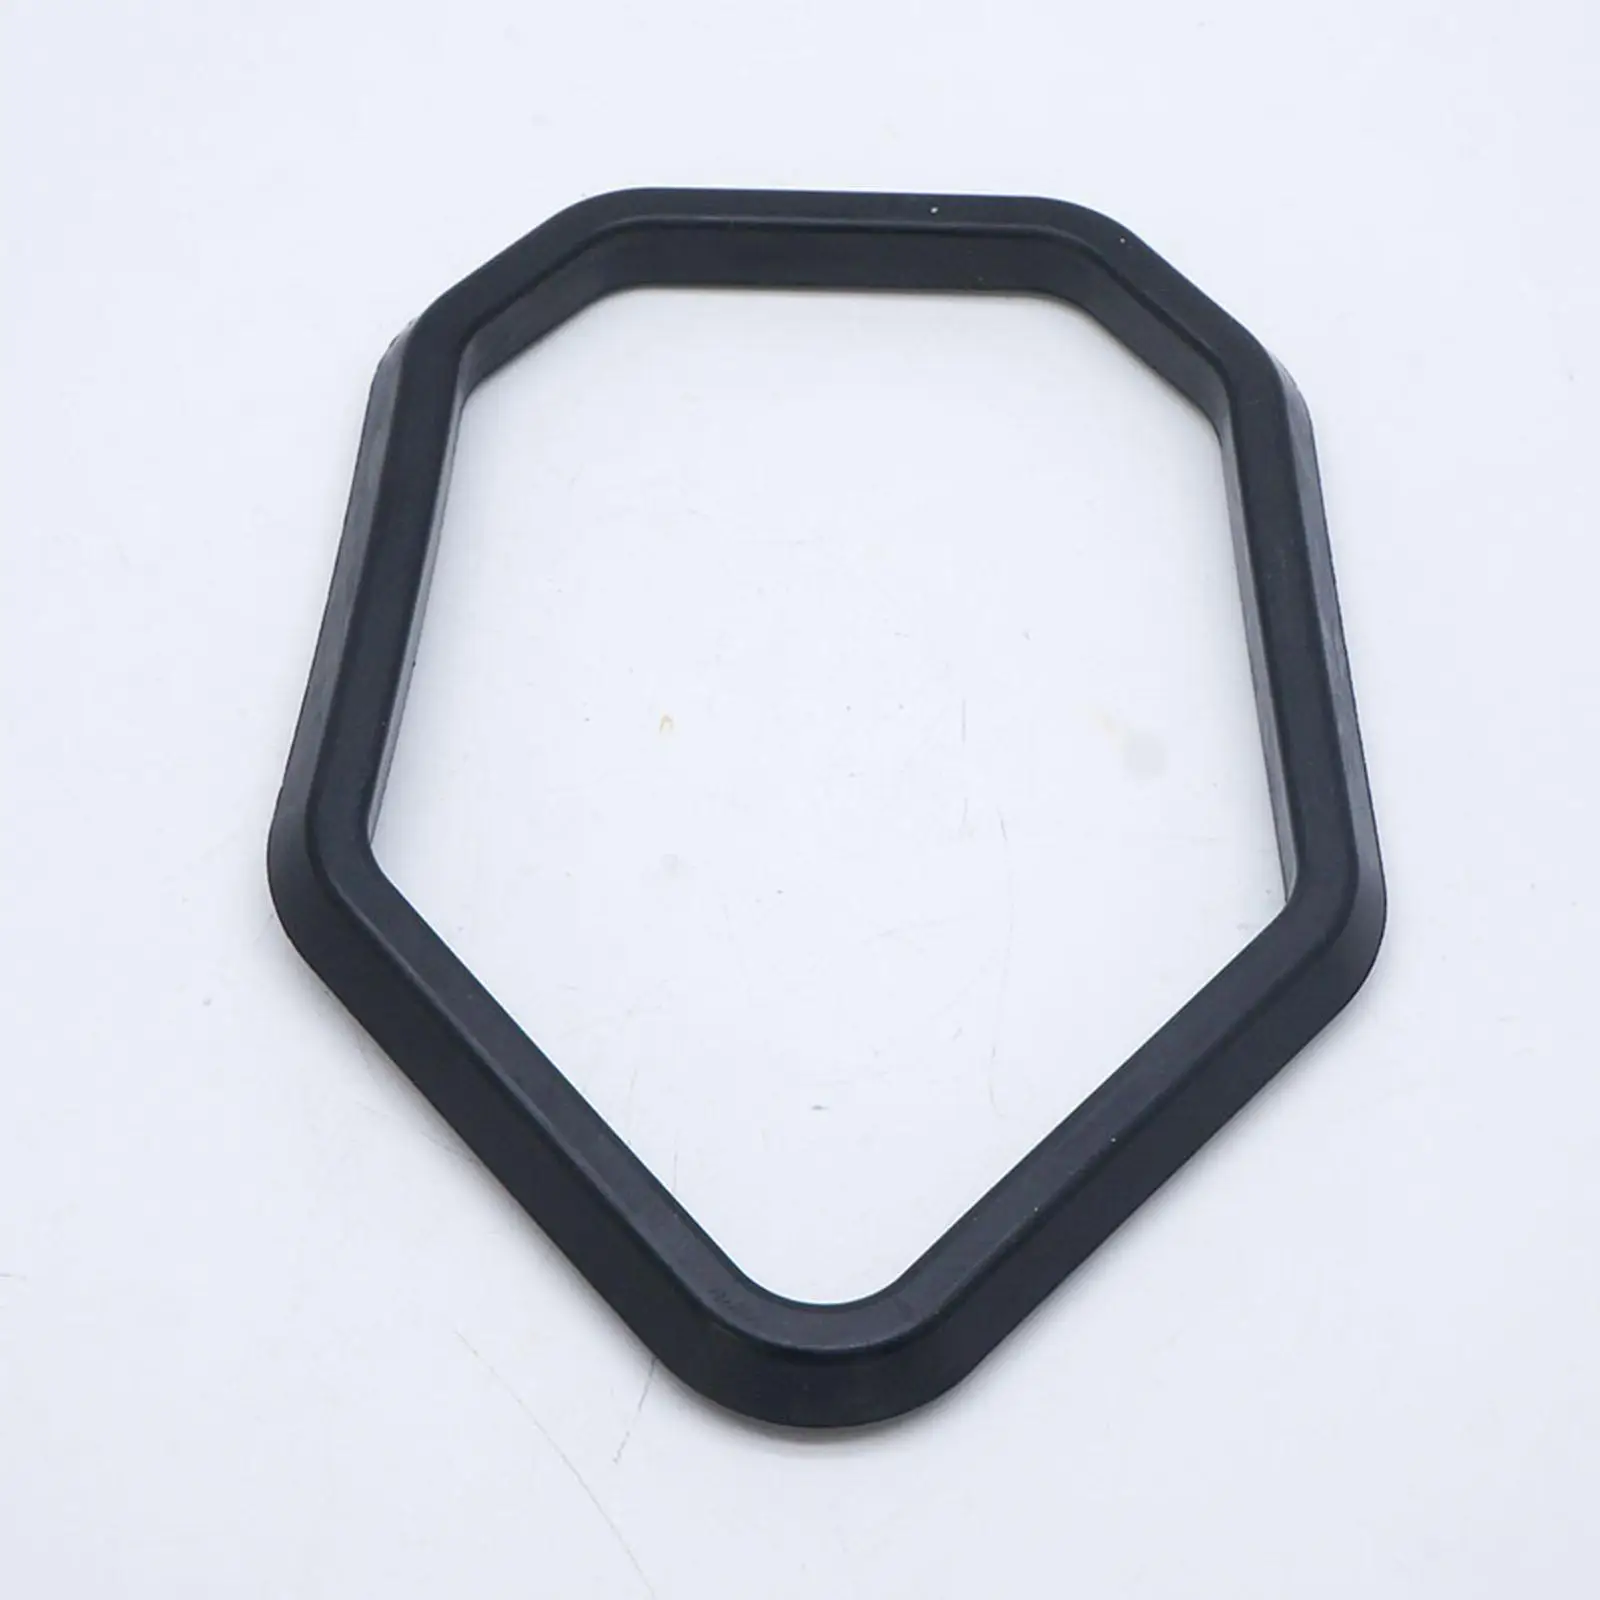 6E5-45123 New Gasket Fits for Outboard Motor 115HP To 250HP